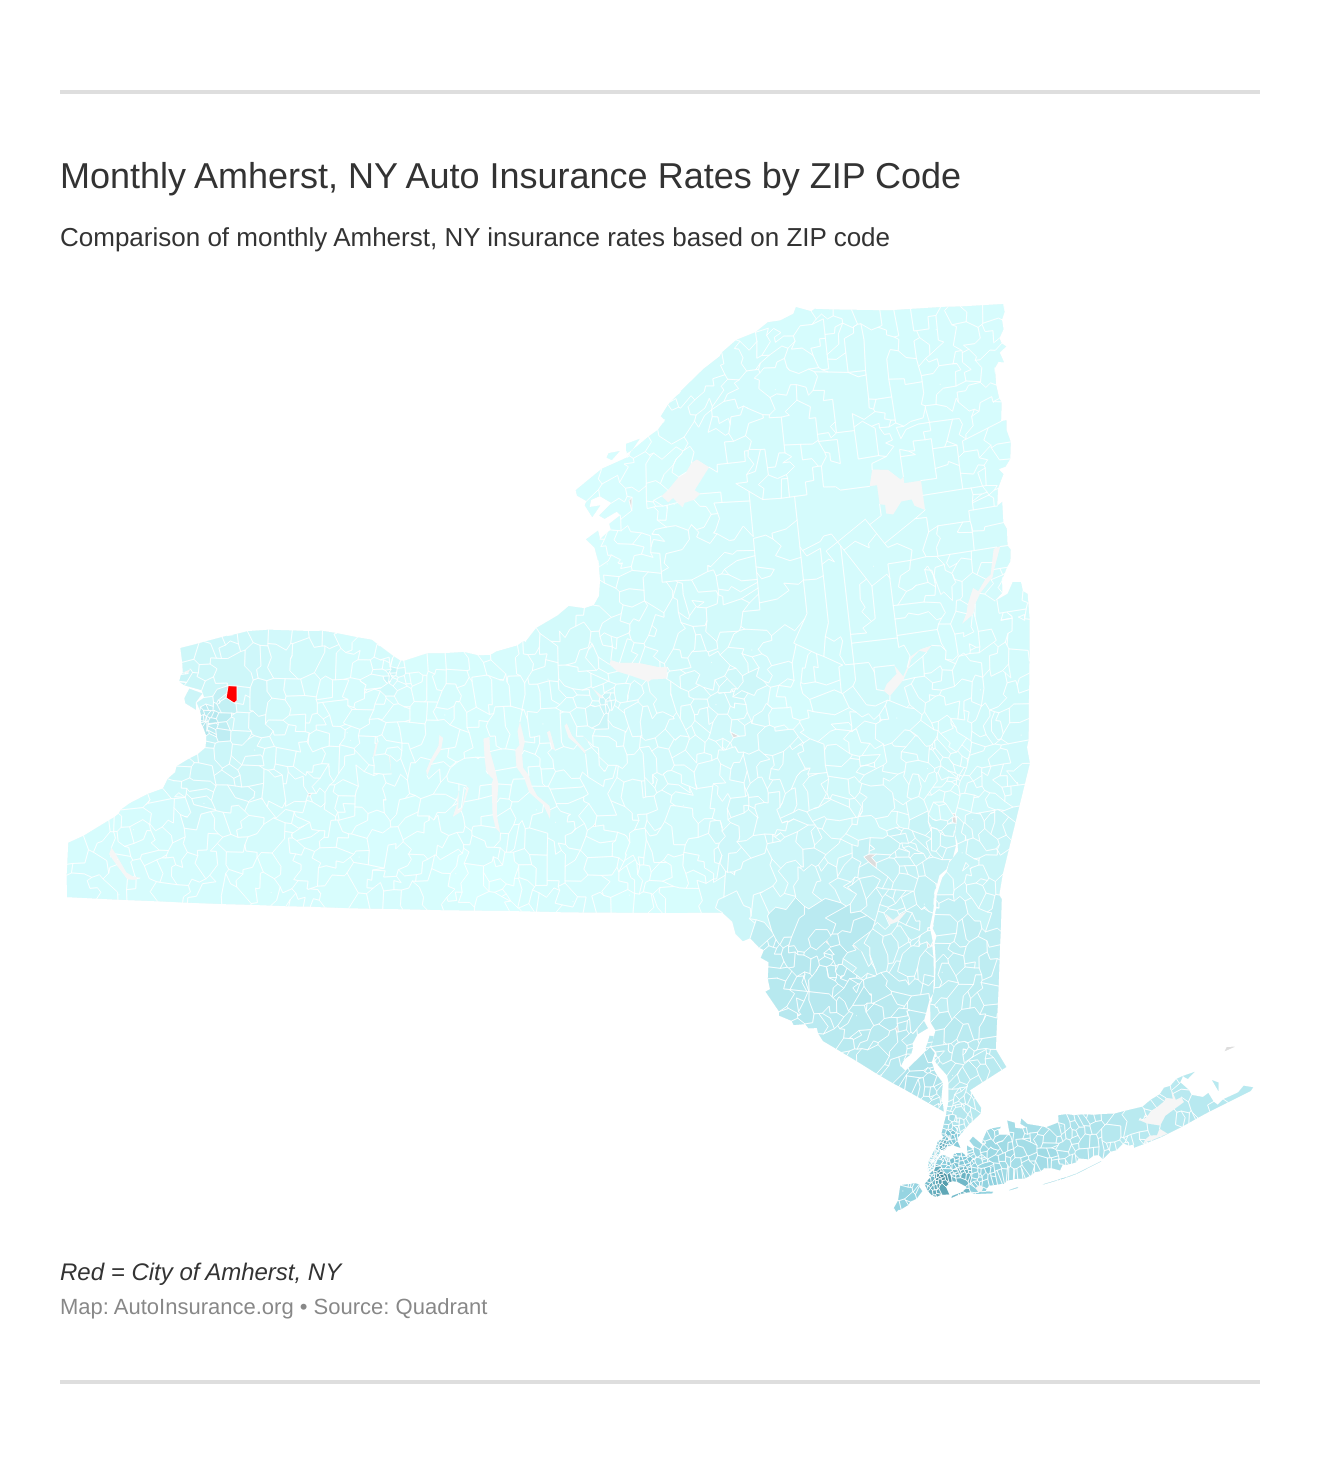 Monthly Amherst, NY Auto Insurance Rates by ZIP Code